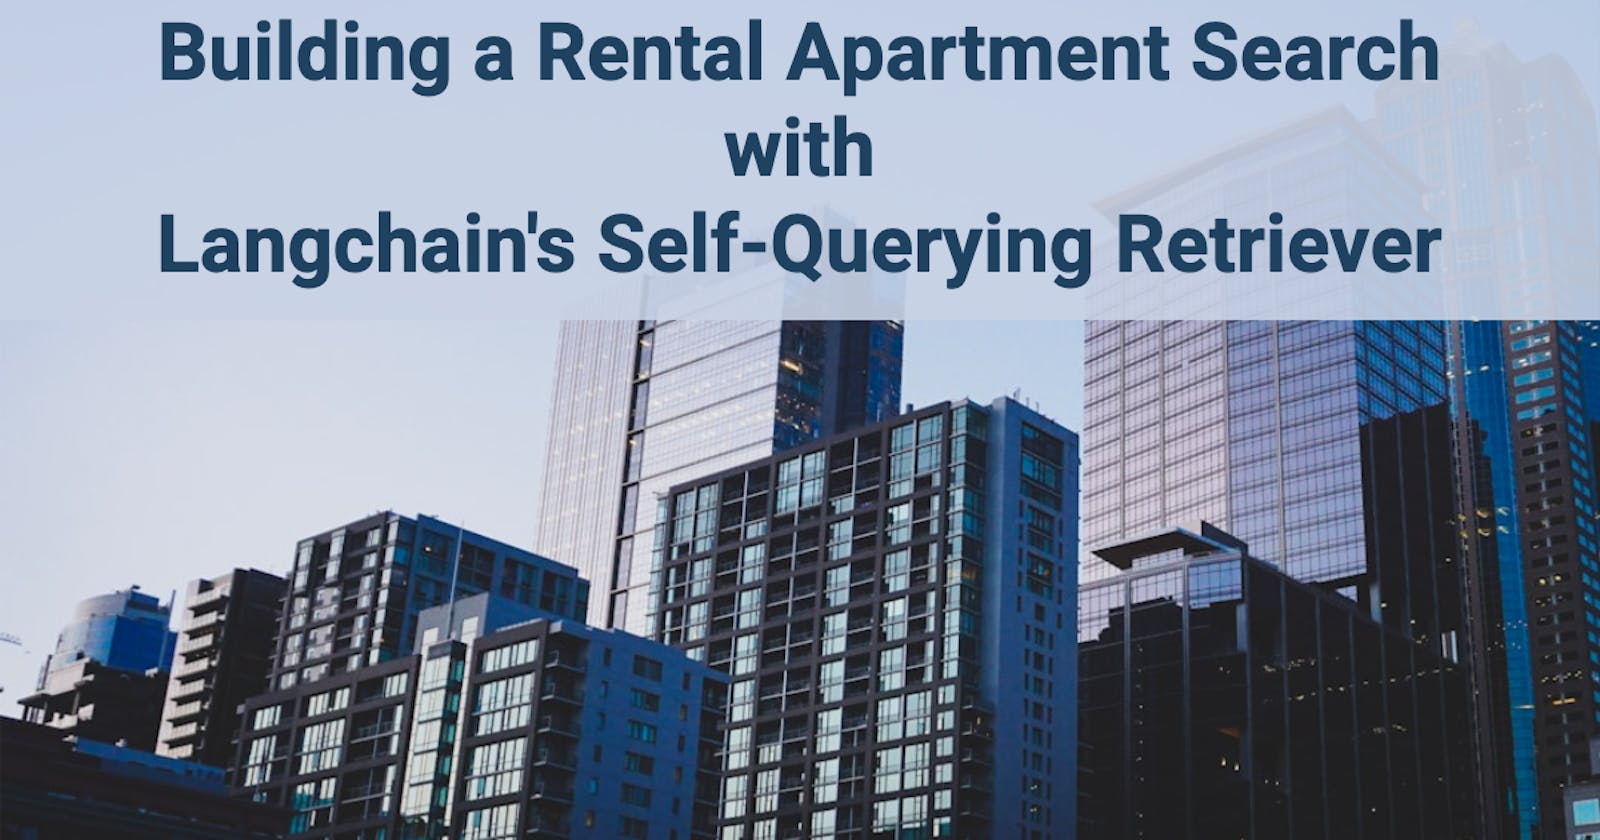 Building a Rental Apartment Search with Langchain's Self-Querying Retriever